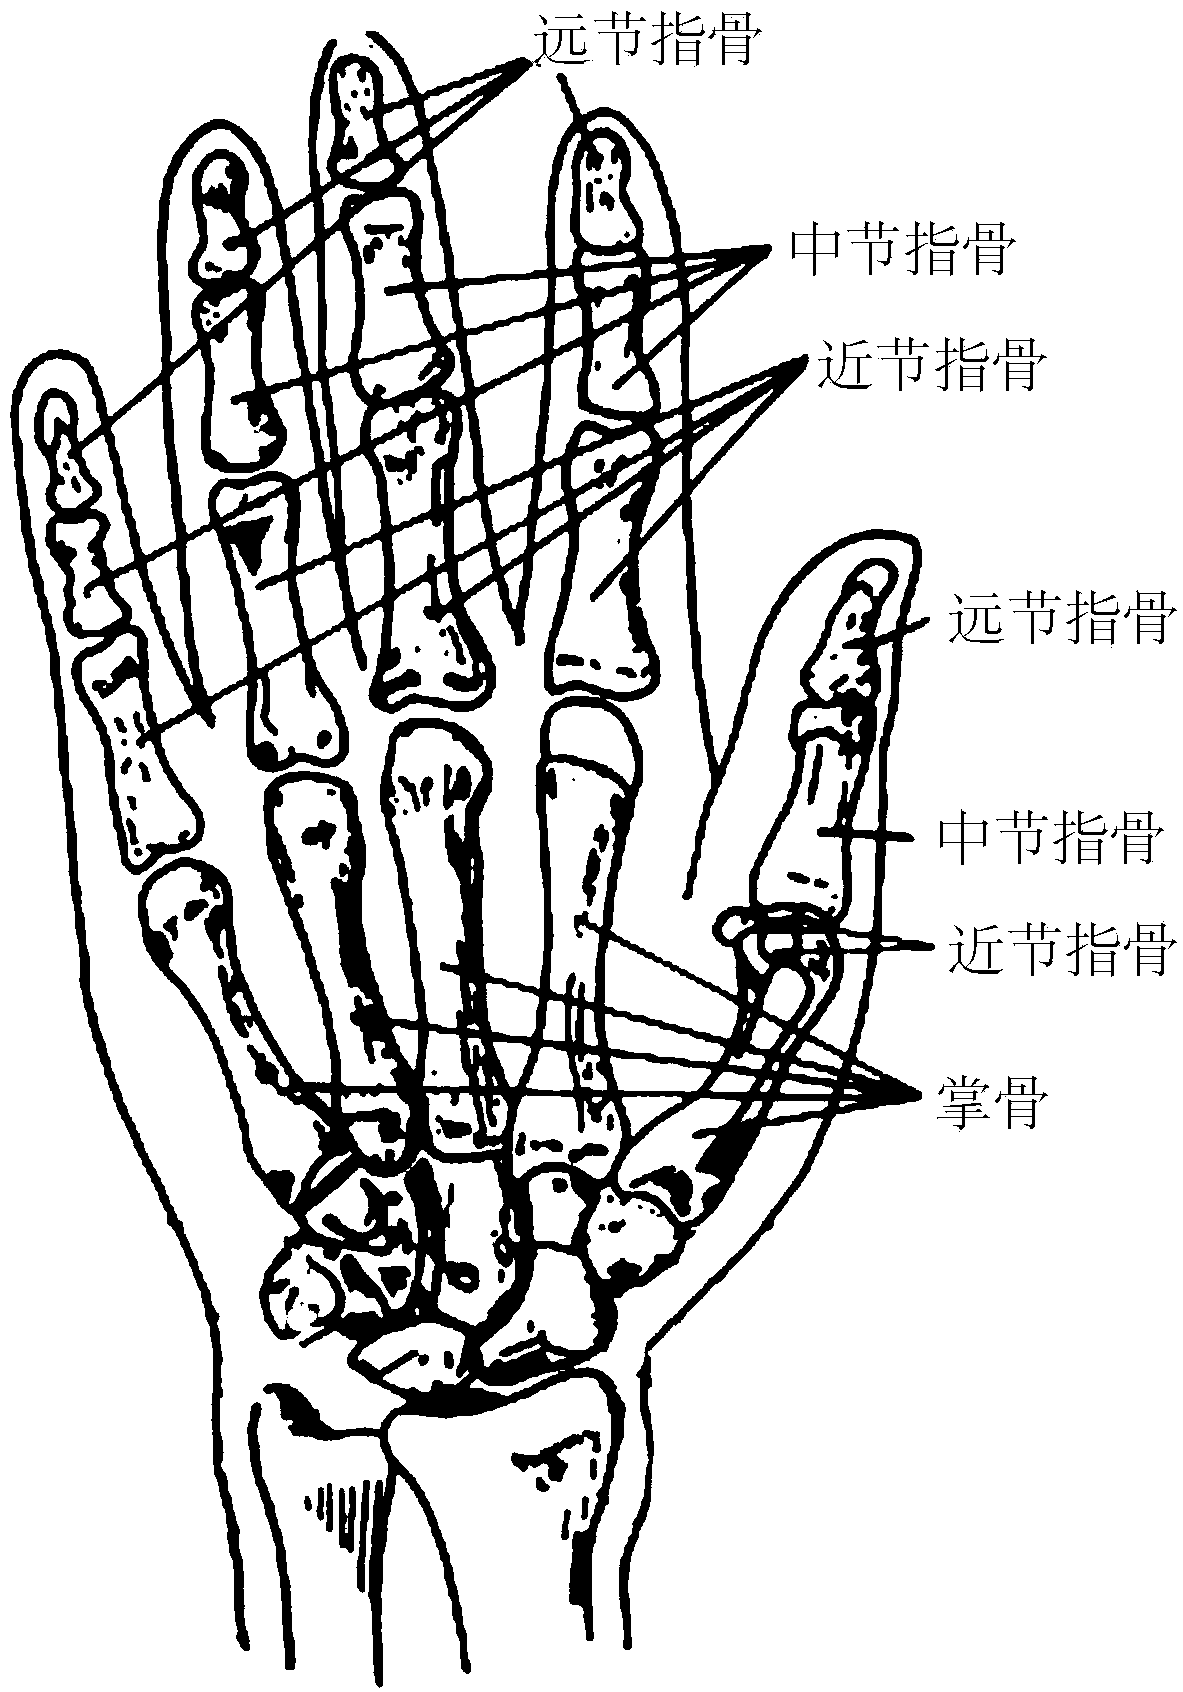 Software driver for assisting four-finger stretching of human hand